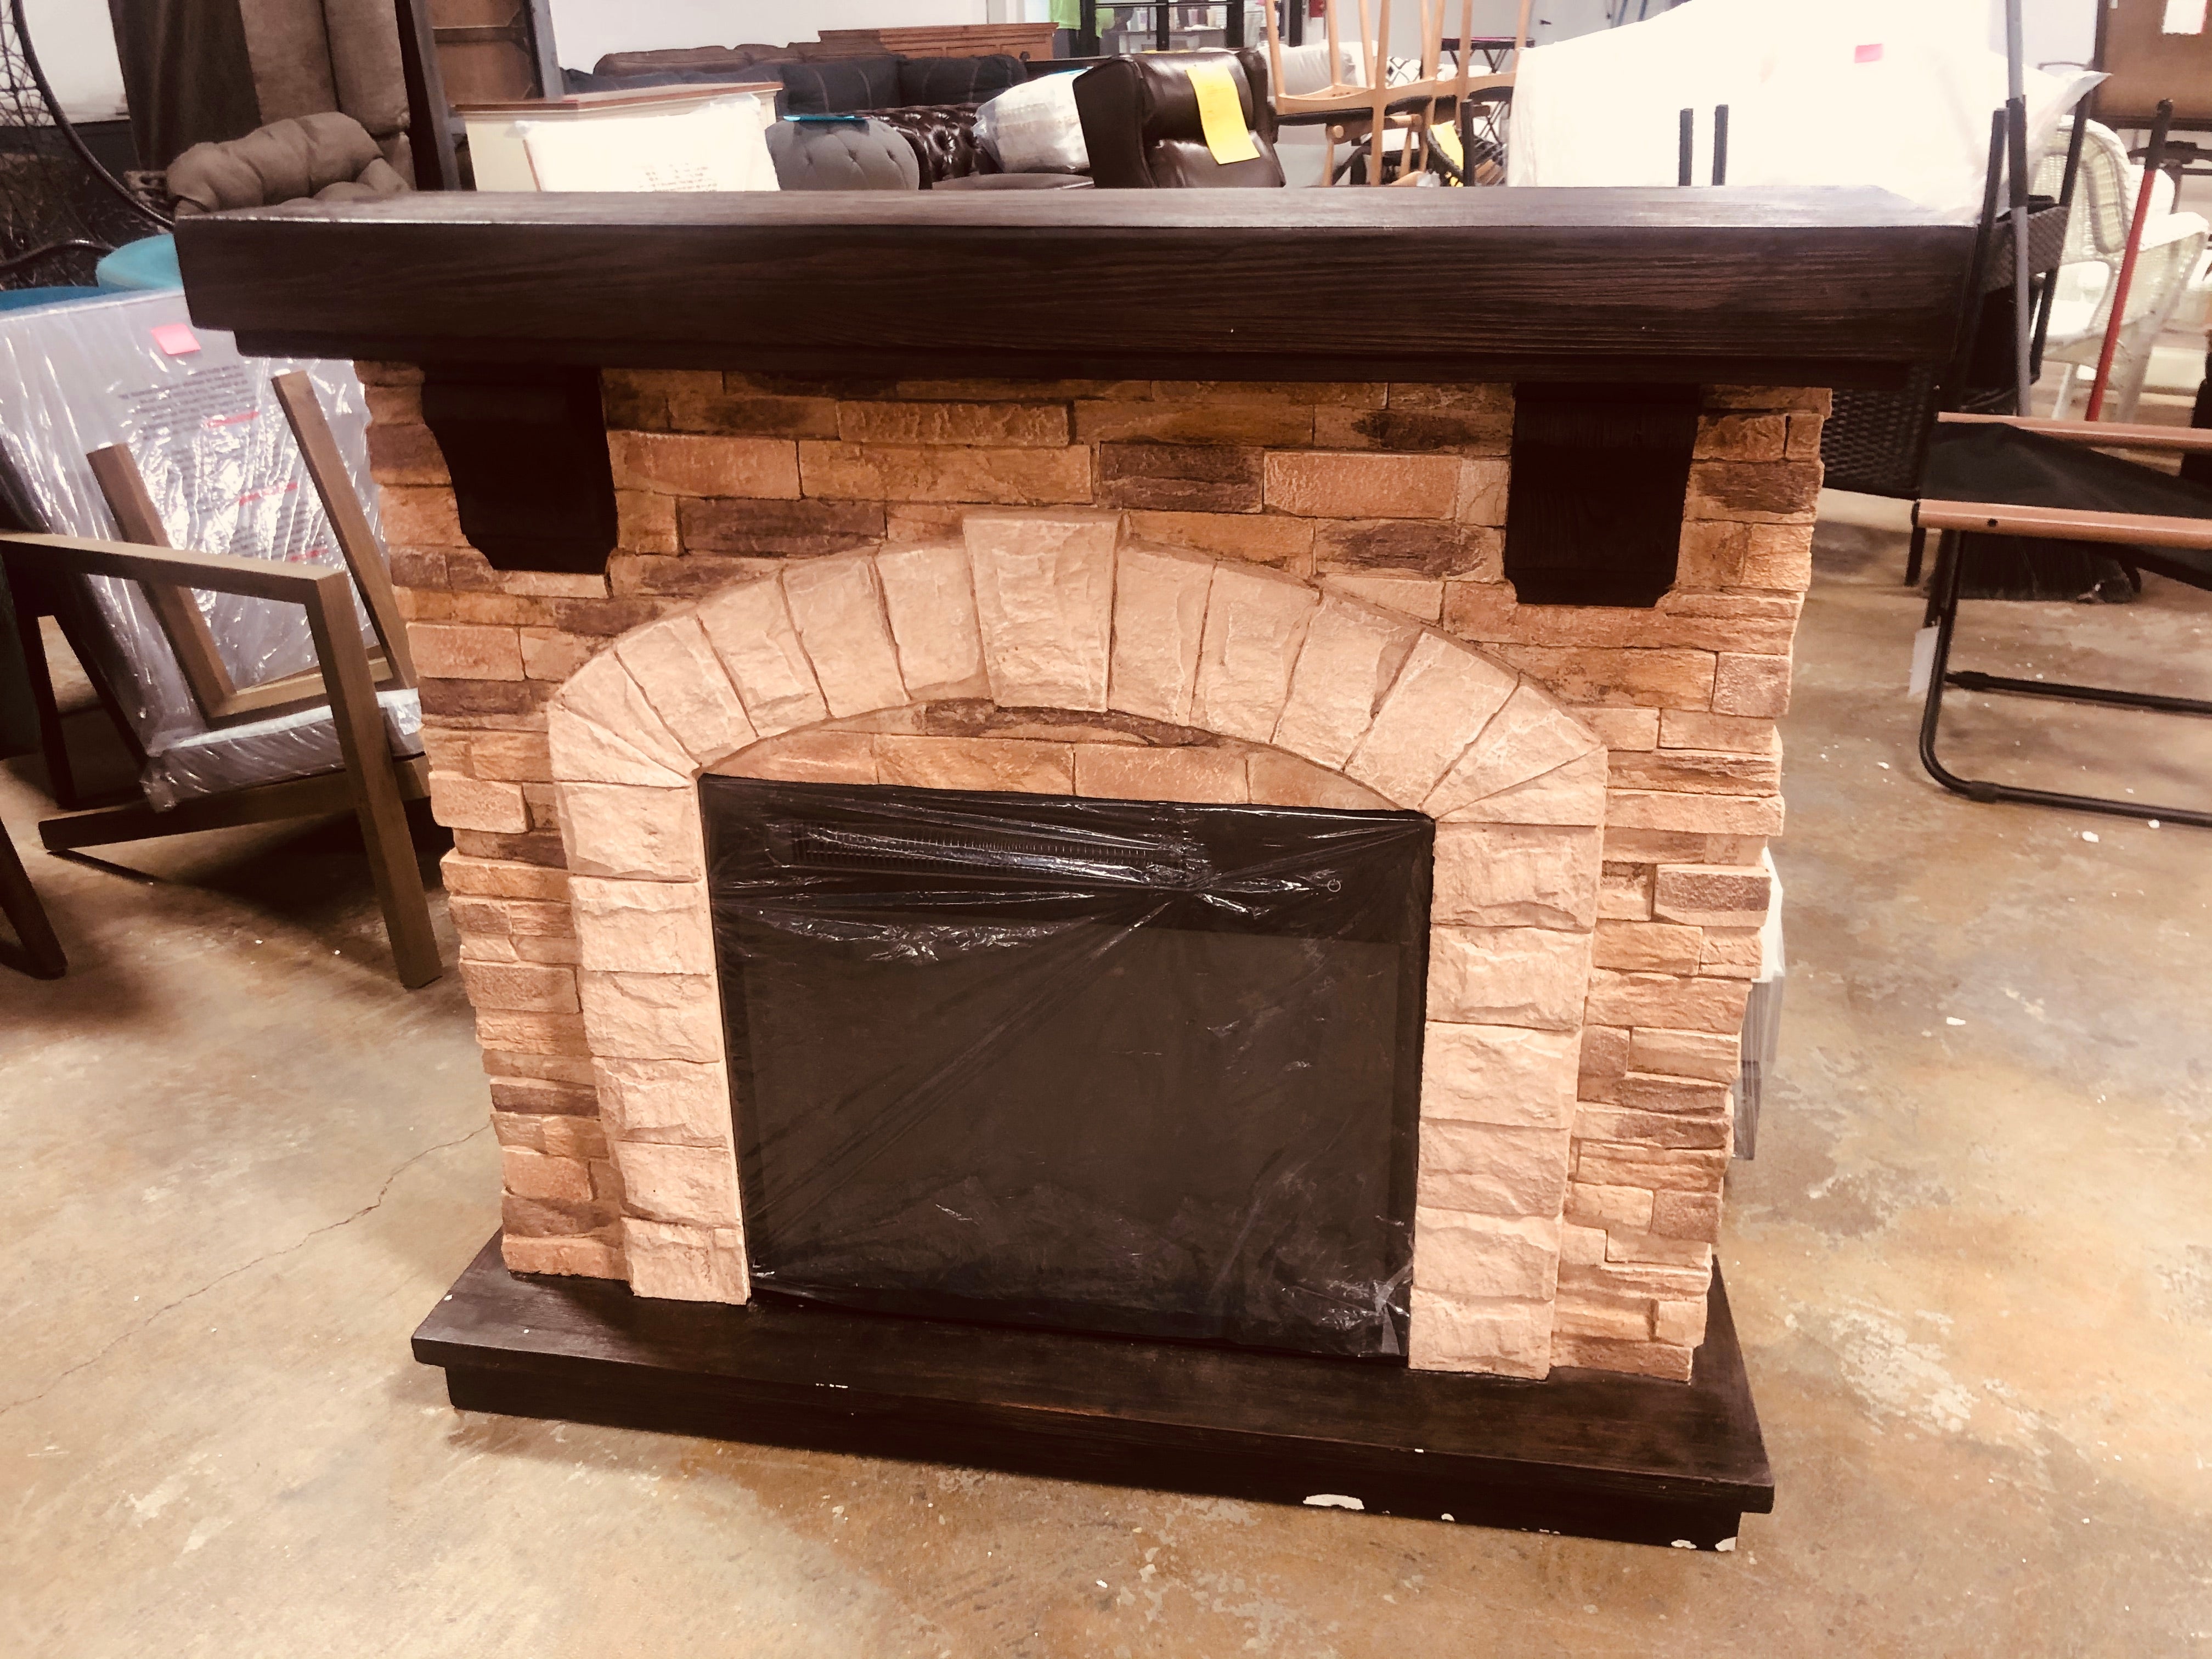 Manford Electric Fireplace